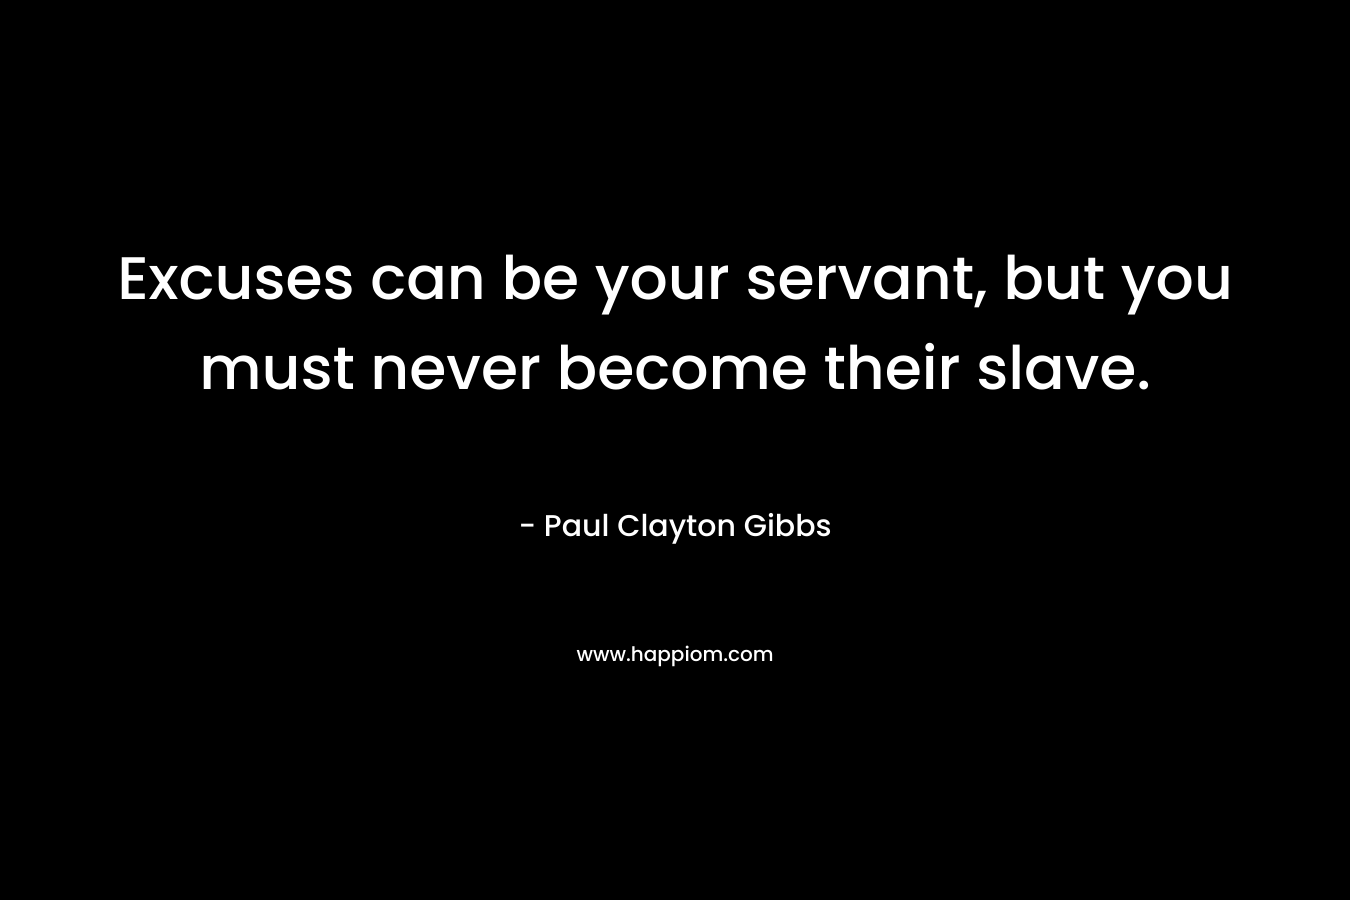 Excuses can be your servant, but you must never become their slave.